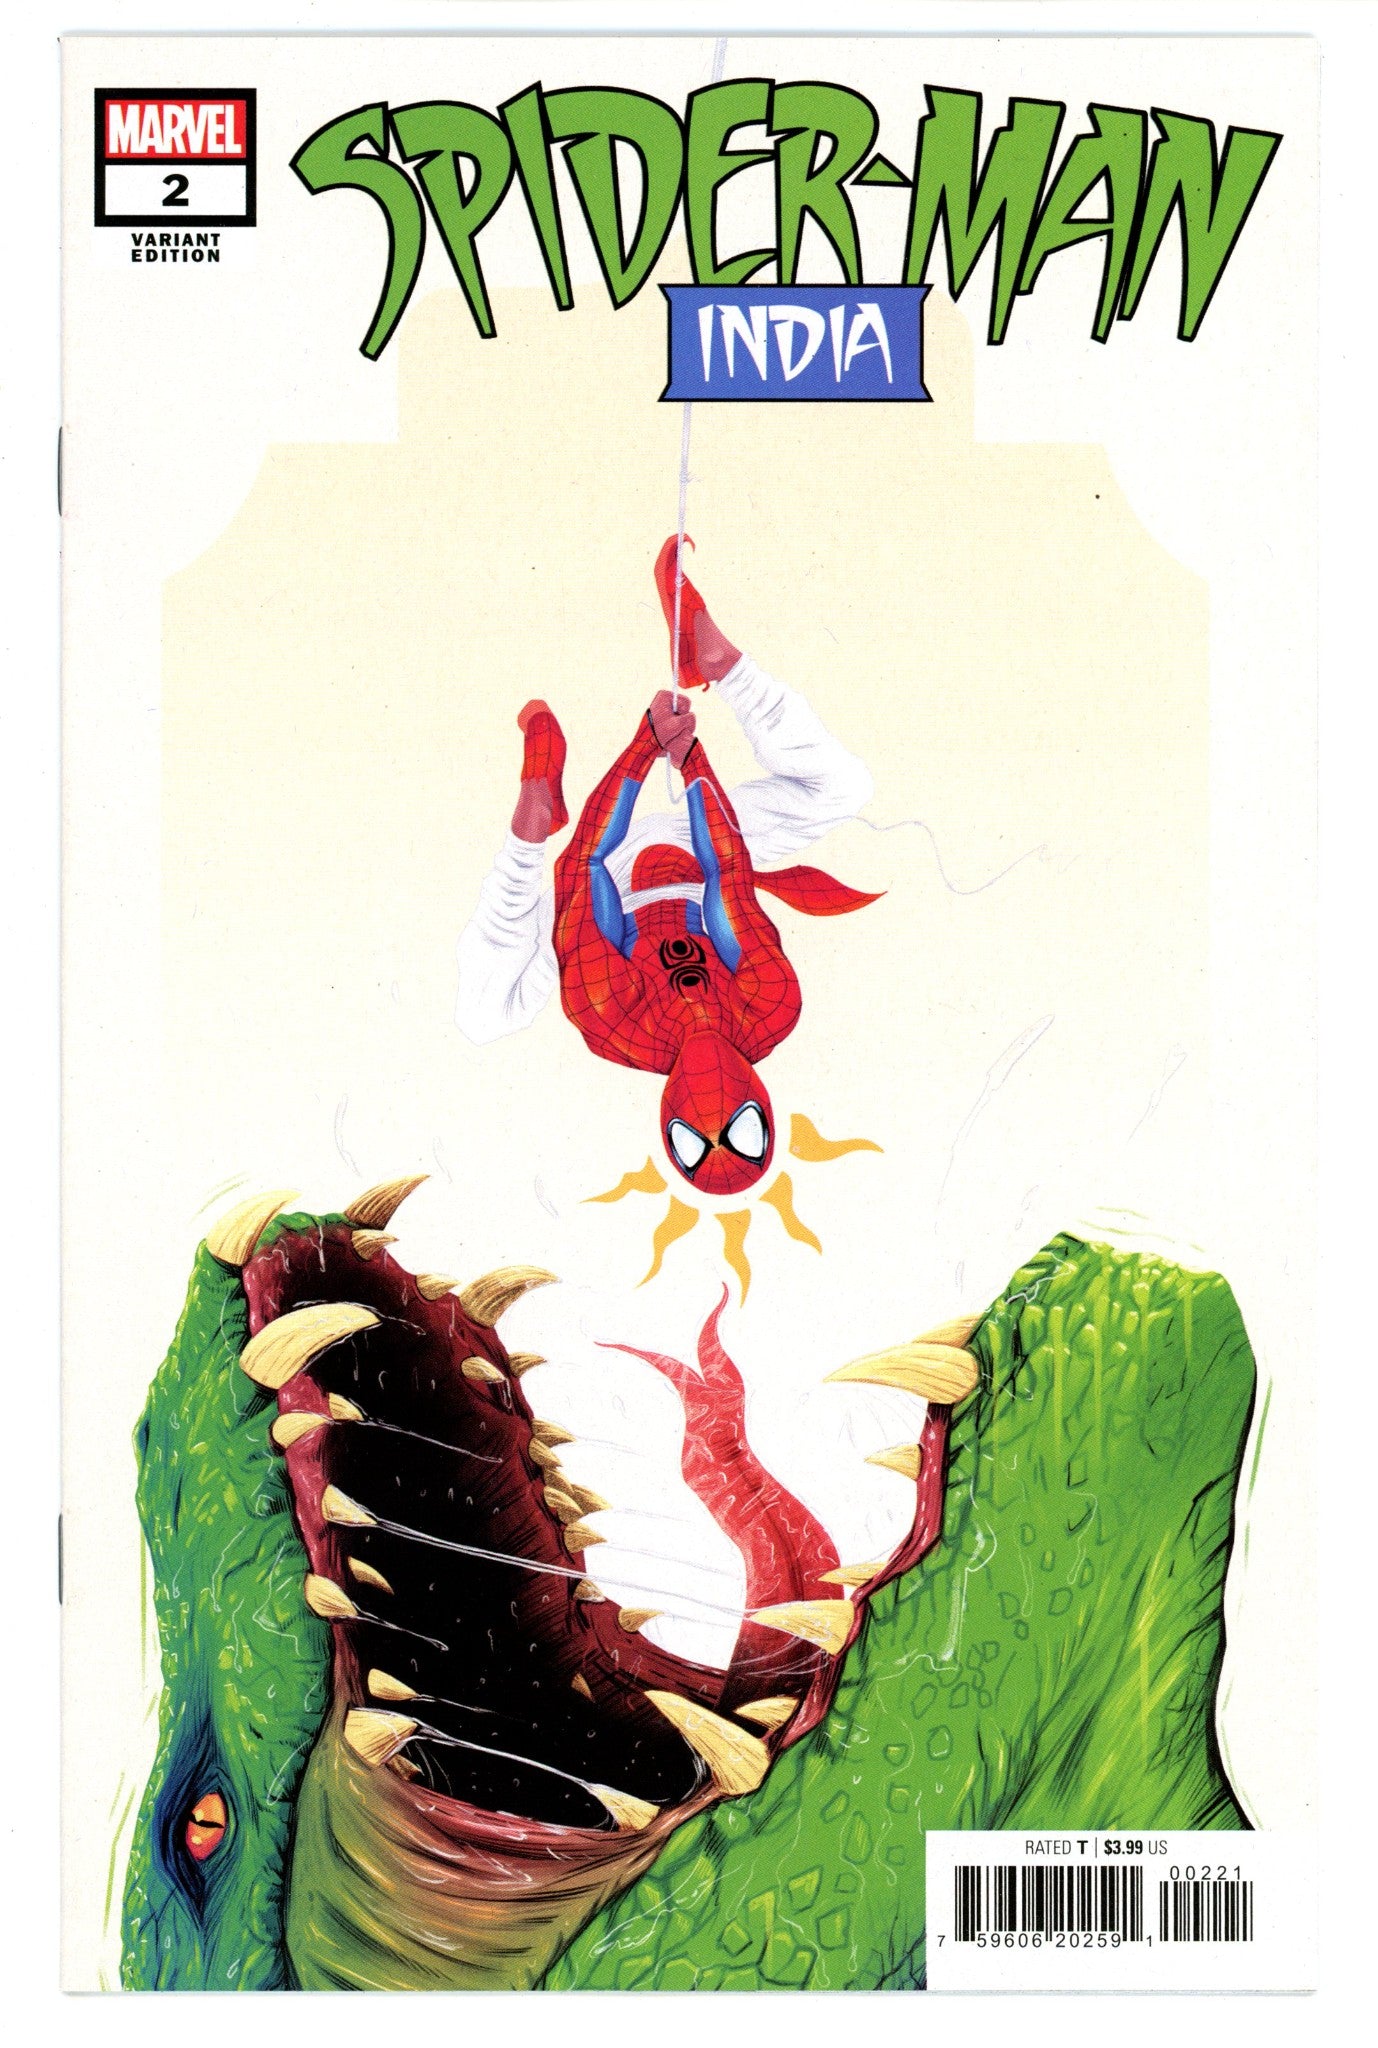 Spider-Man: India Vol 2 2 High Grade (2023) Doaly Variant 